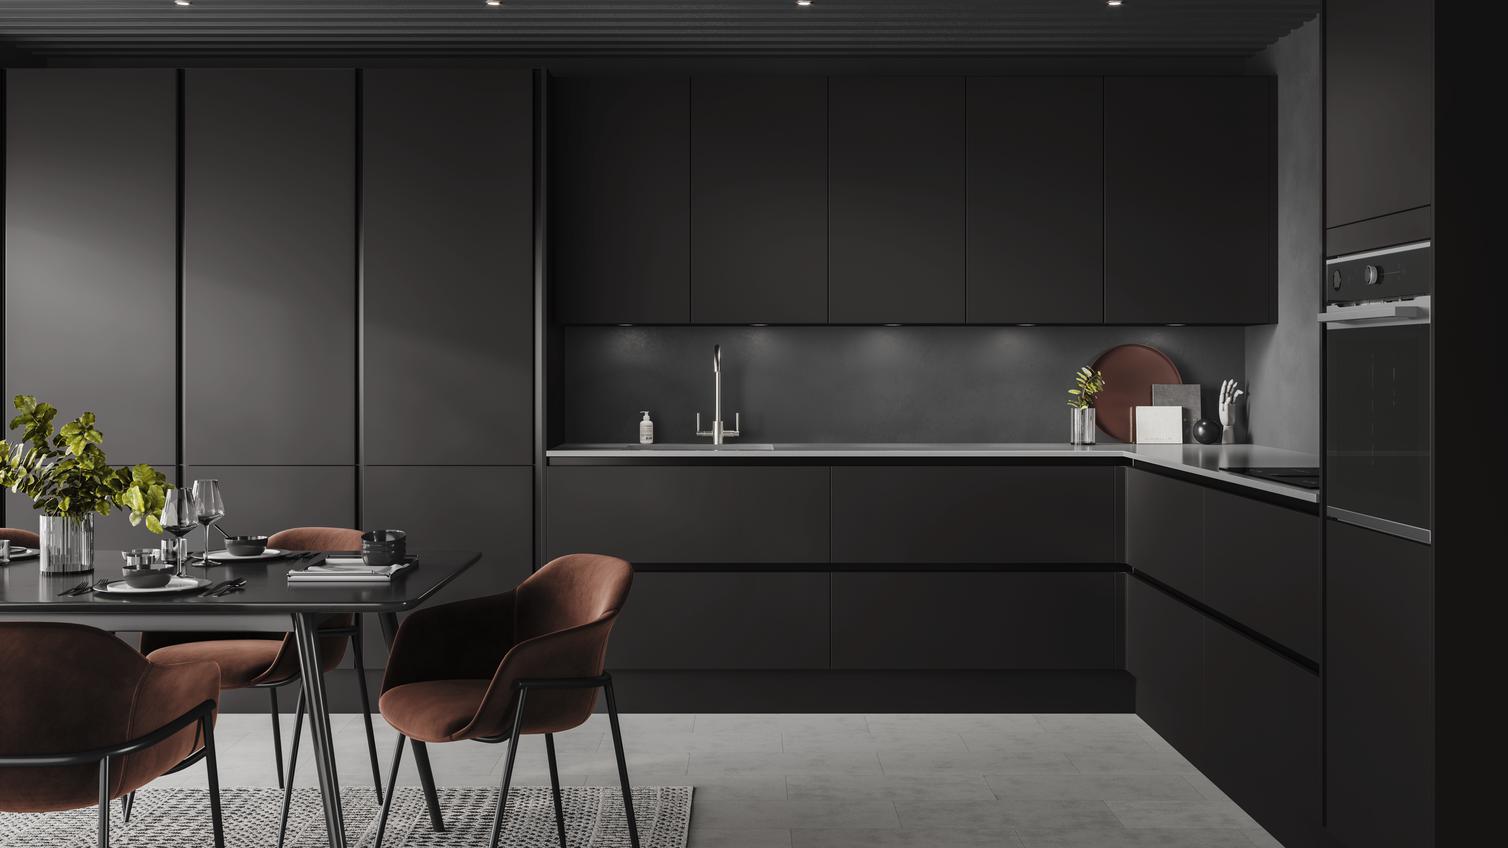 Handleless black kitchen idea using charcoal slab doors and black trims. Includes larders and drawers in a L-shaped layout.